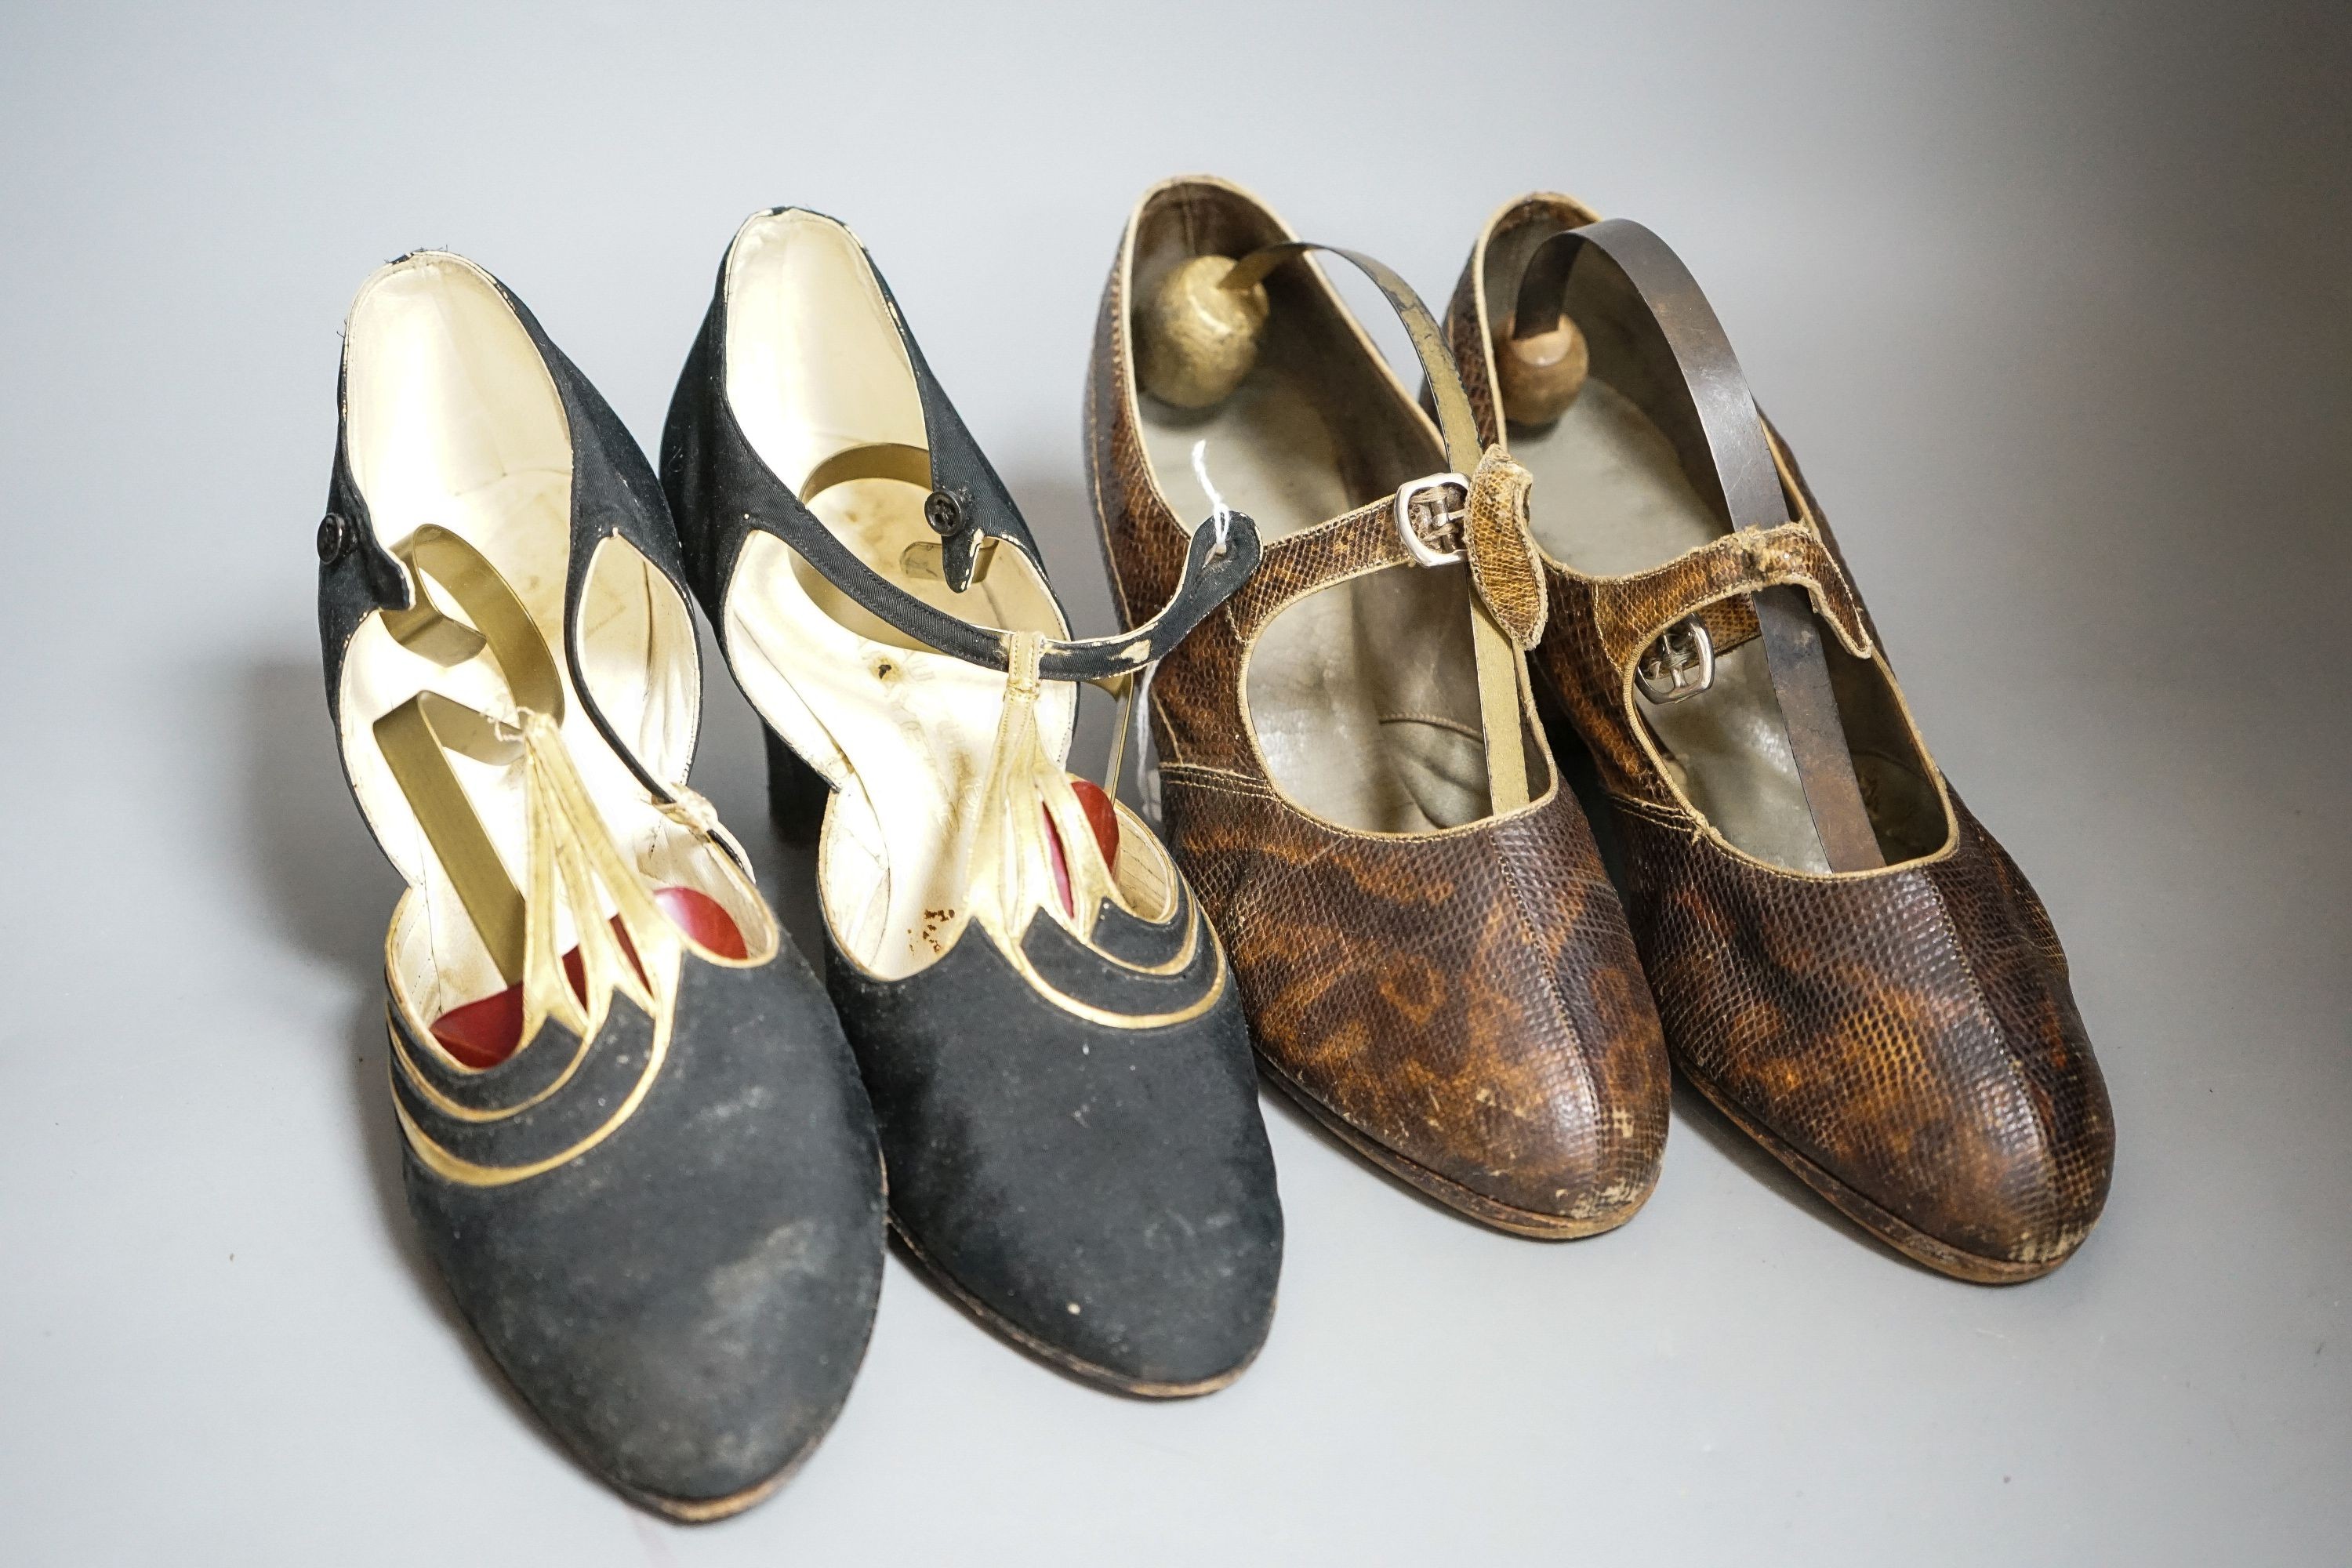 A pair of black silk and gold kid leather 1930's evening shoes and a similar pair of lizard and snakeskin shoes